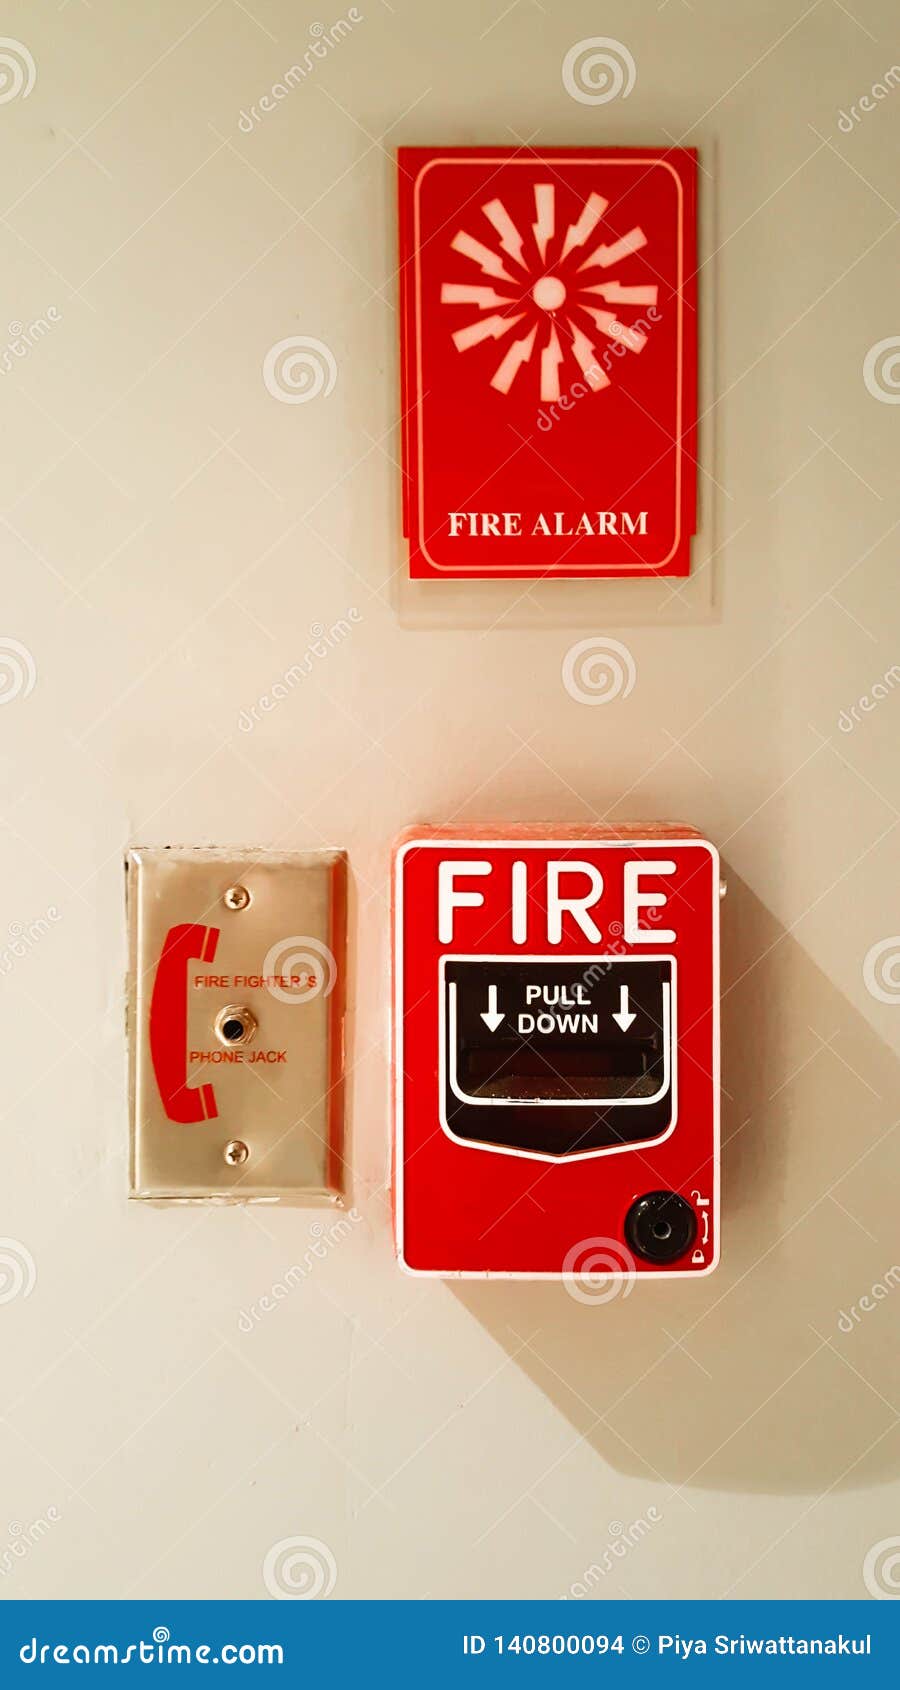 Fire alarm switch on wall stock photo. Image of fireman - 140800094